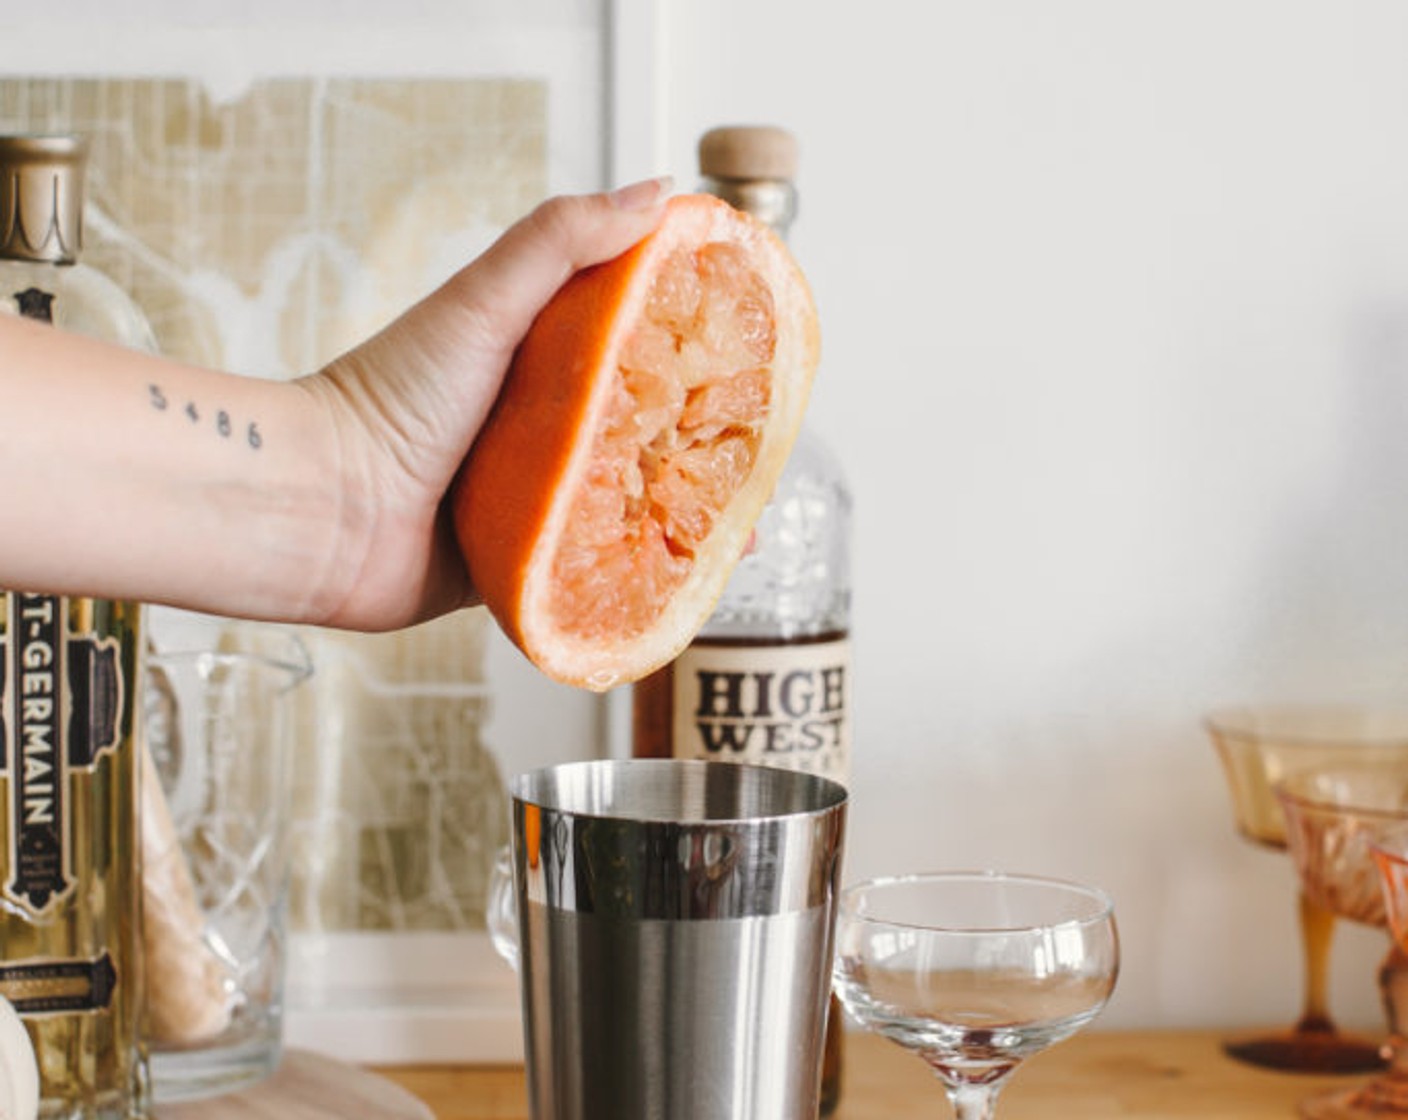 step 1 Add 1 oz of juice from a Grapefruit (1), 1 fl oz of juice from Lemon (1), Whiskey (1.5 fl oz), Egg (1), and Maple Syrup (0.5 oz) to your shaker and dry shake (no ice!) for 60 seconds.